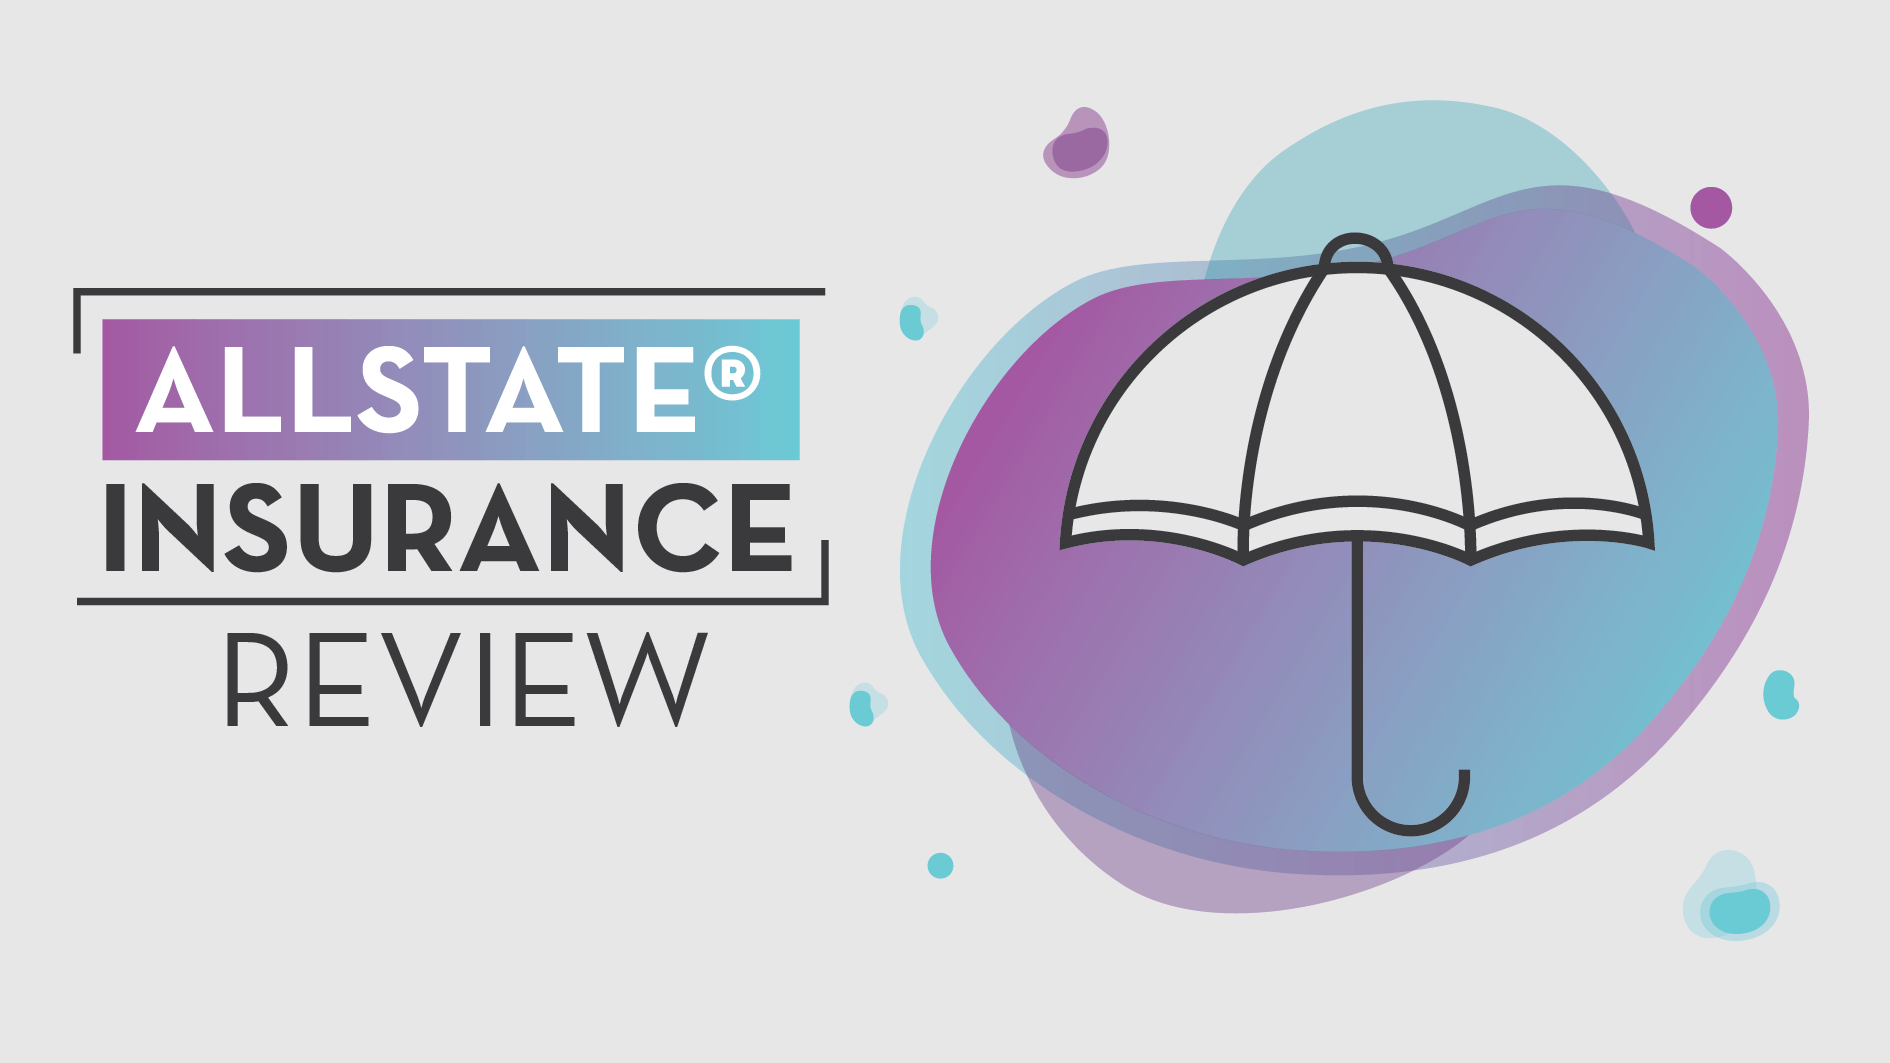 Allstate® Insurance Review  quote.com